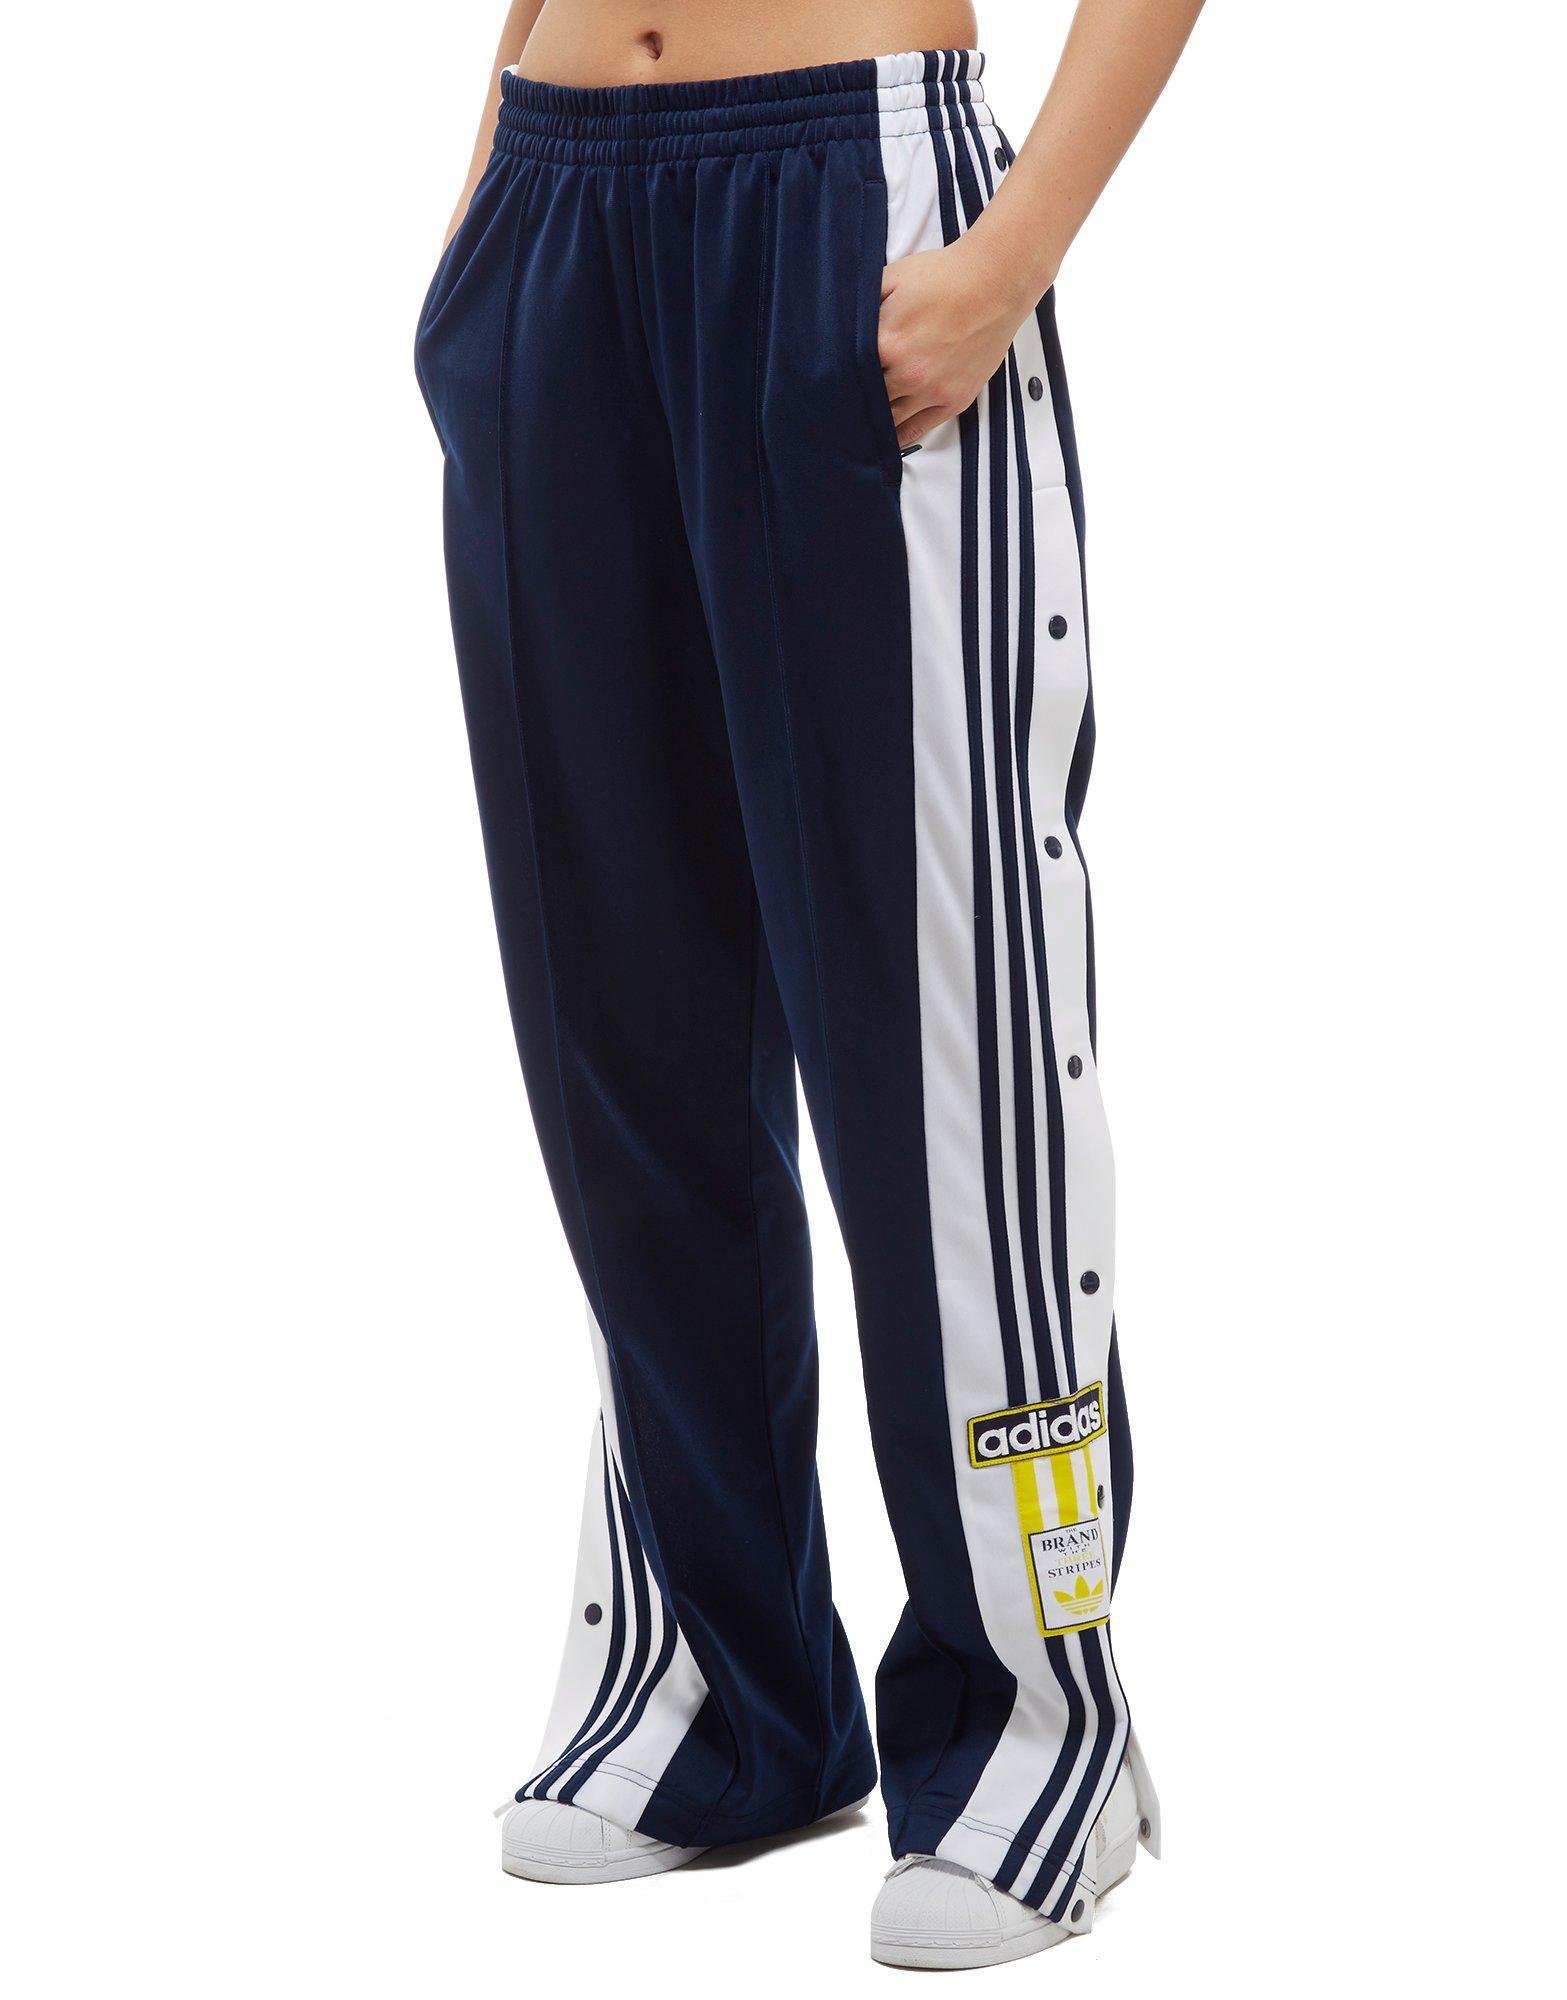 Adidas Popper Trousers Womens Clearance, SAVE 45% - lutheranems.com